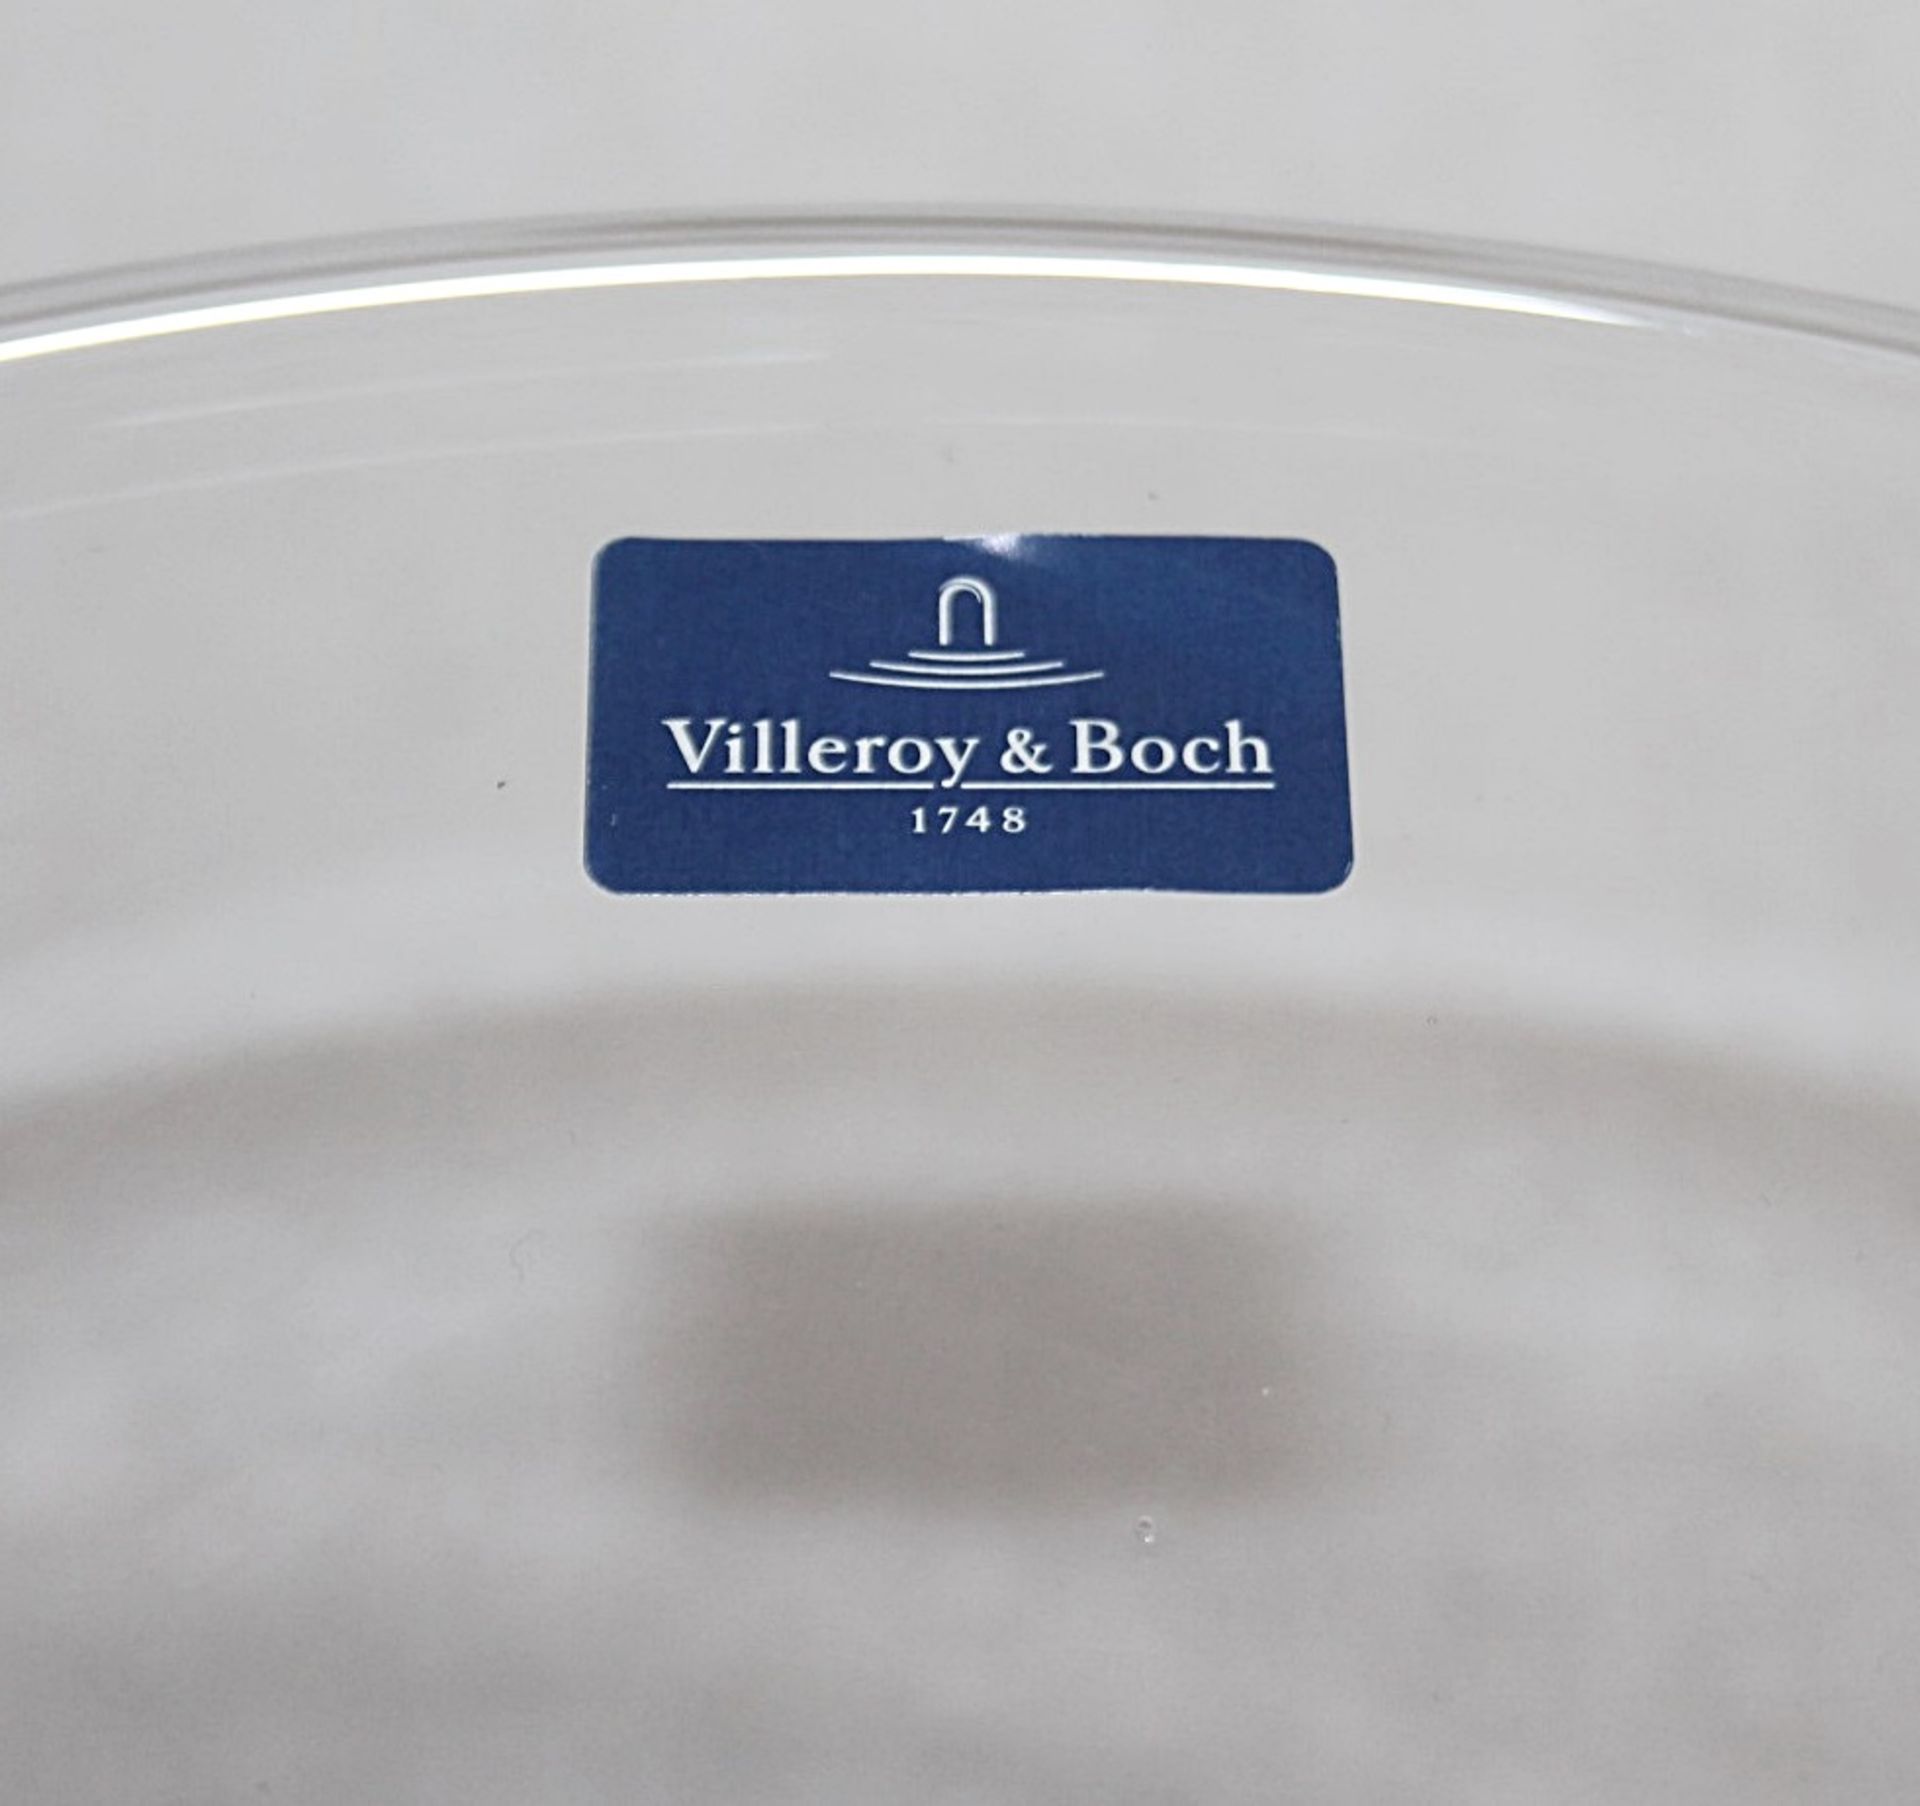 1 x VILLEROY & BOCH 'Retro Accessoires' Crystal Glass Serving Plate / Cake Stand - Image 5 of 6